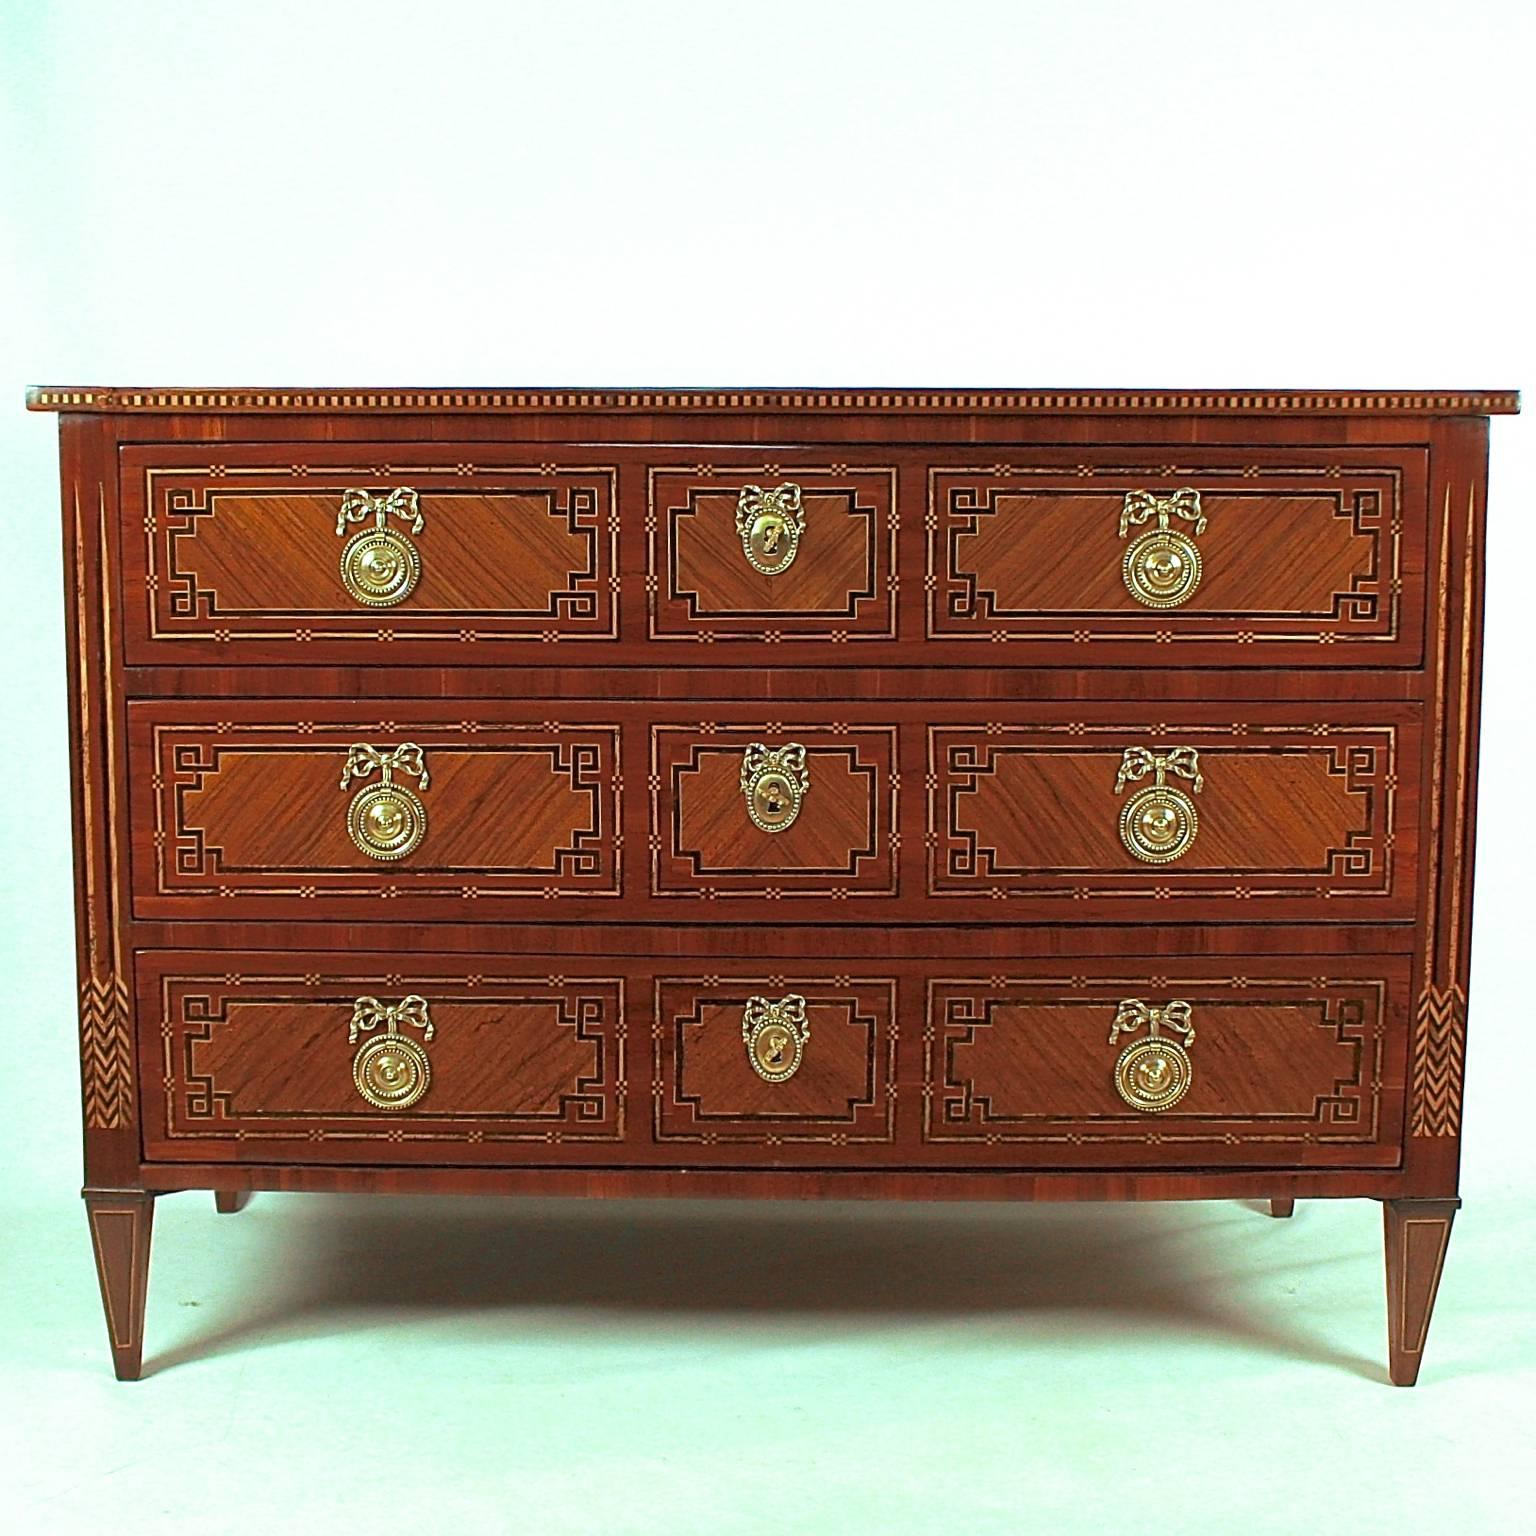 Fine Eastern French Louis XVI chest of drawers or commode of high craftsmanship. The three-drawer pinewood carcass veneered in walnut, plum, maple and other woods. The drawers with three mirror-veneered panels, with checkered inlaid banding and